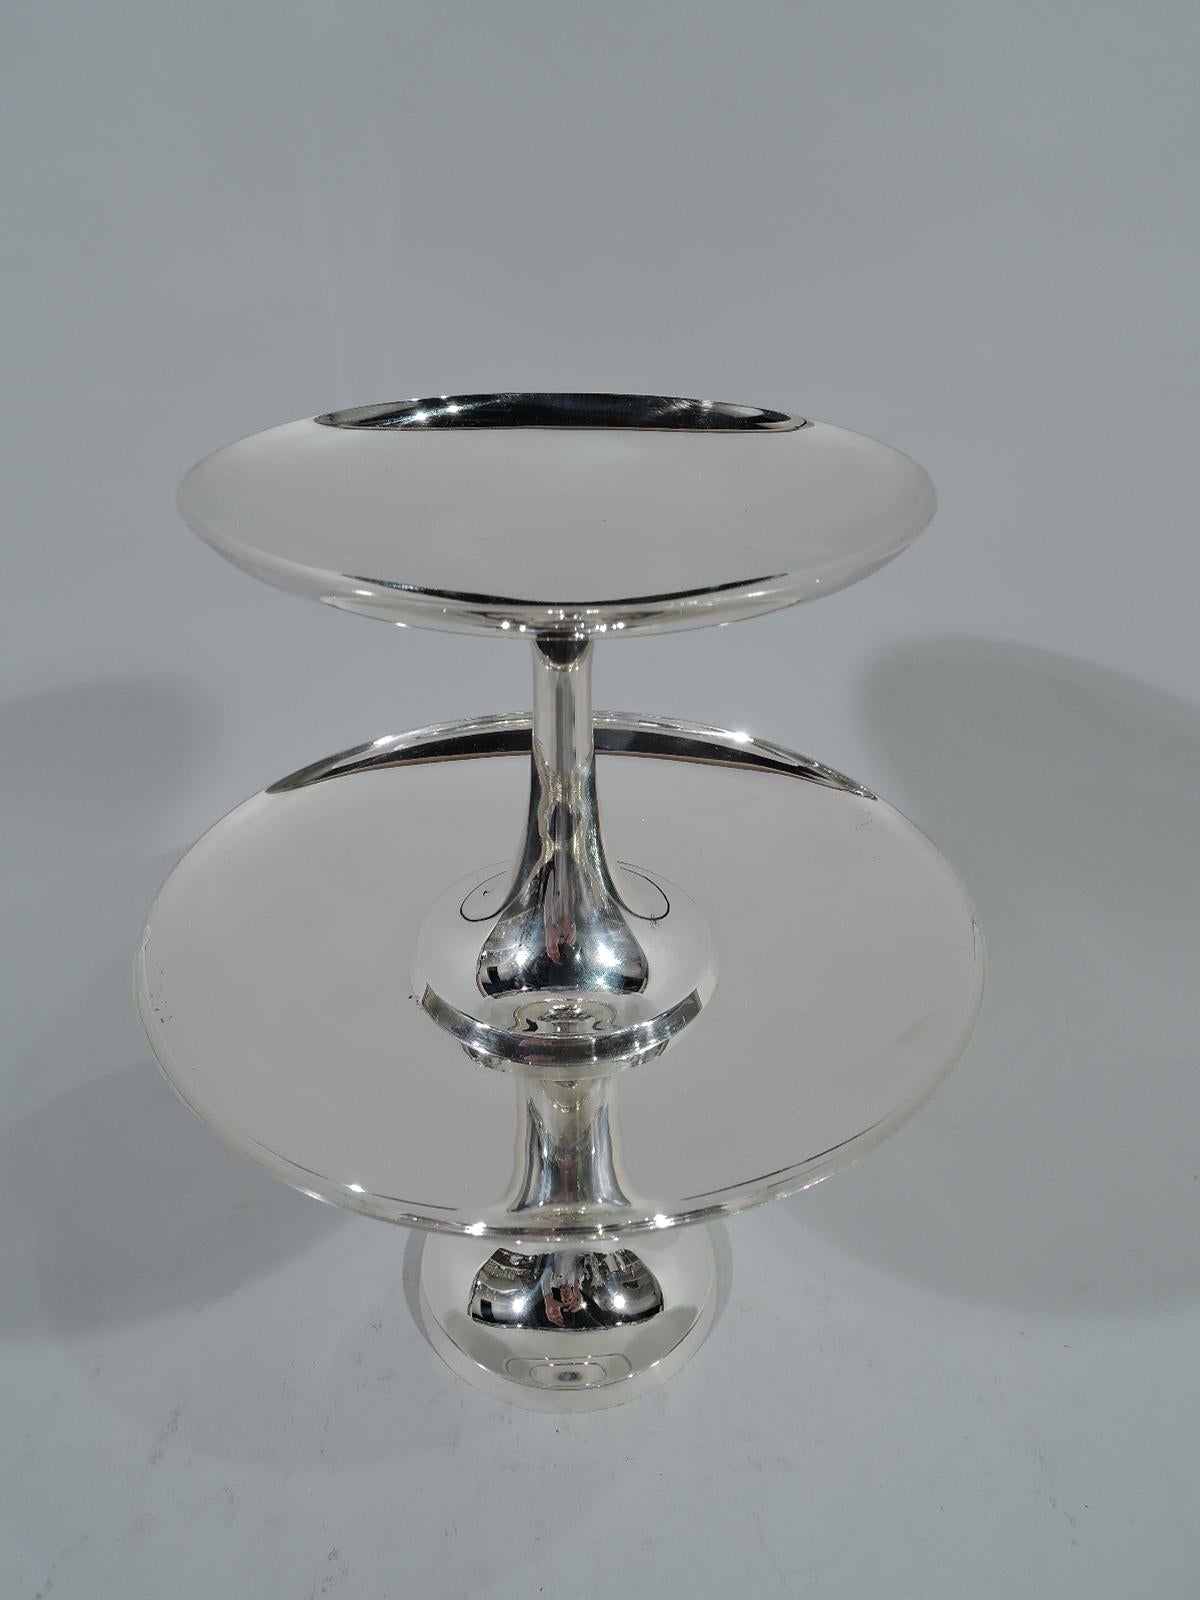 Rare Mid-Century Modern sterling silver two-tiered cake stand comprising two stacking compotes. Made by Tiffany & Co. in New York. Each compote has a raised foot, upward tapering stem, and shallow disc bowl. The small compote’s foot fits on the